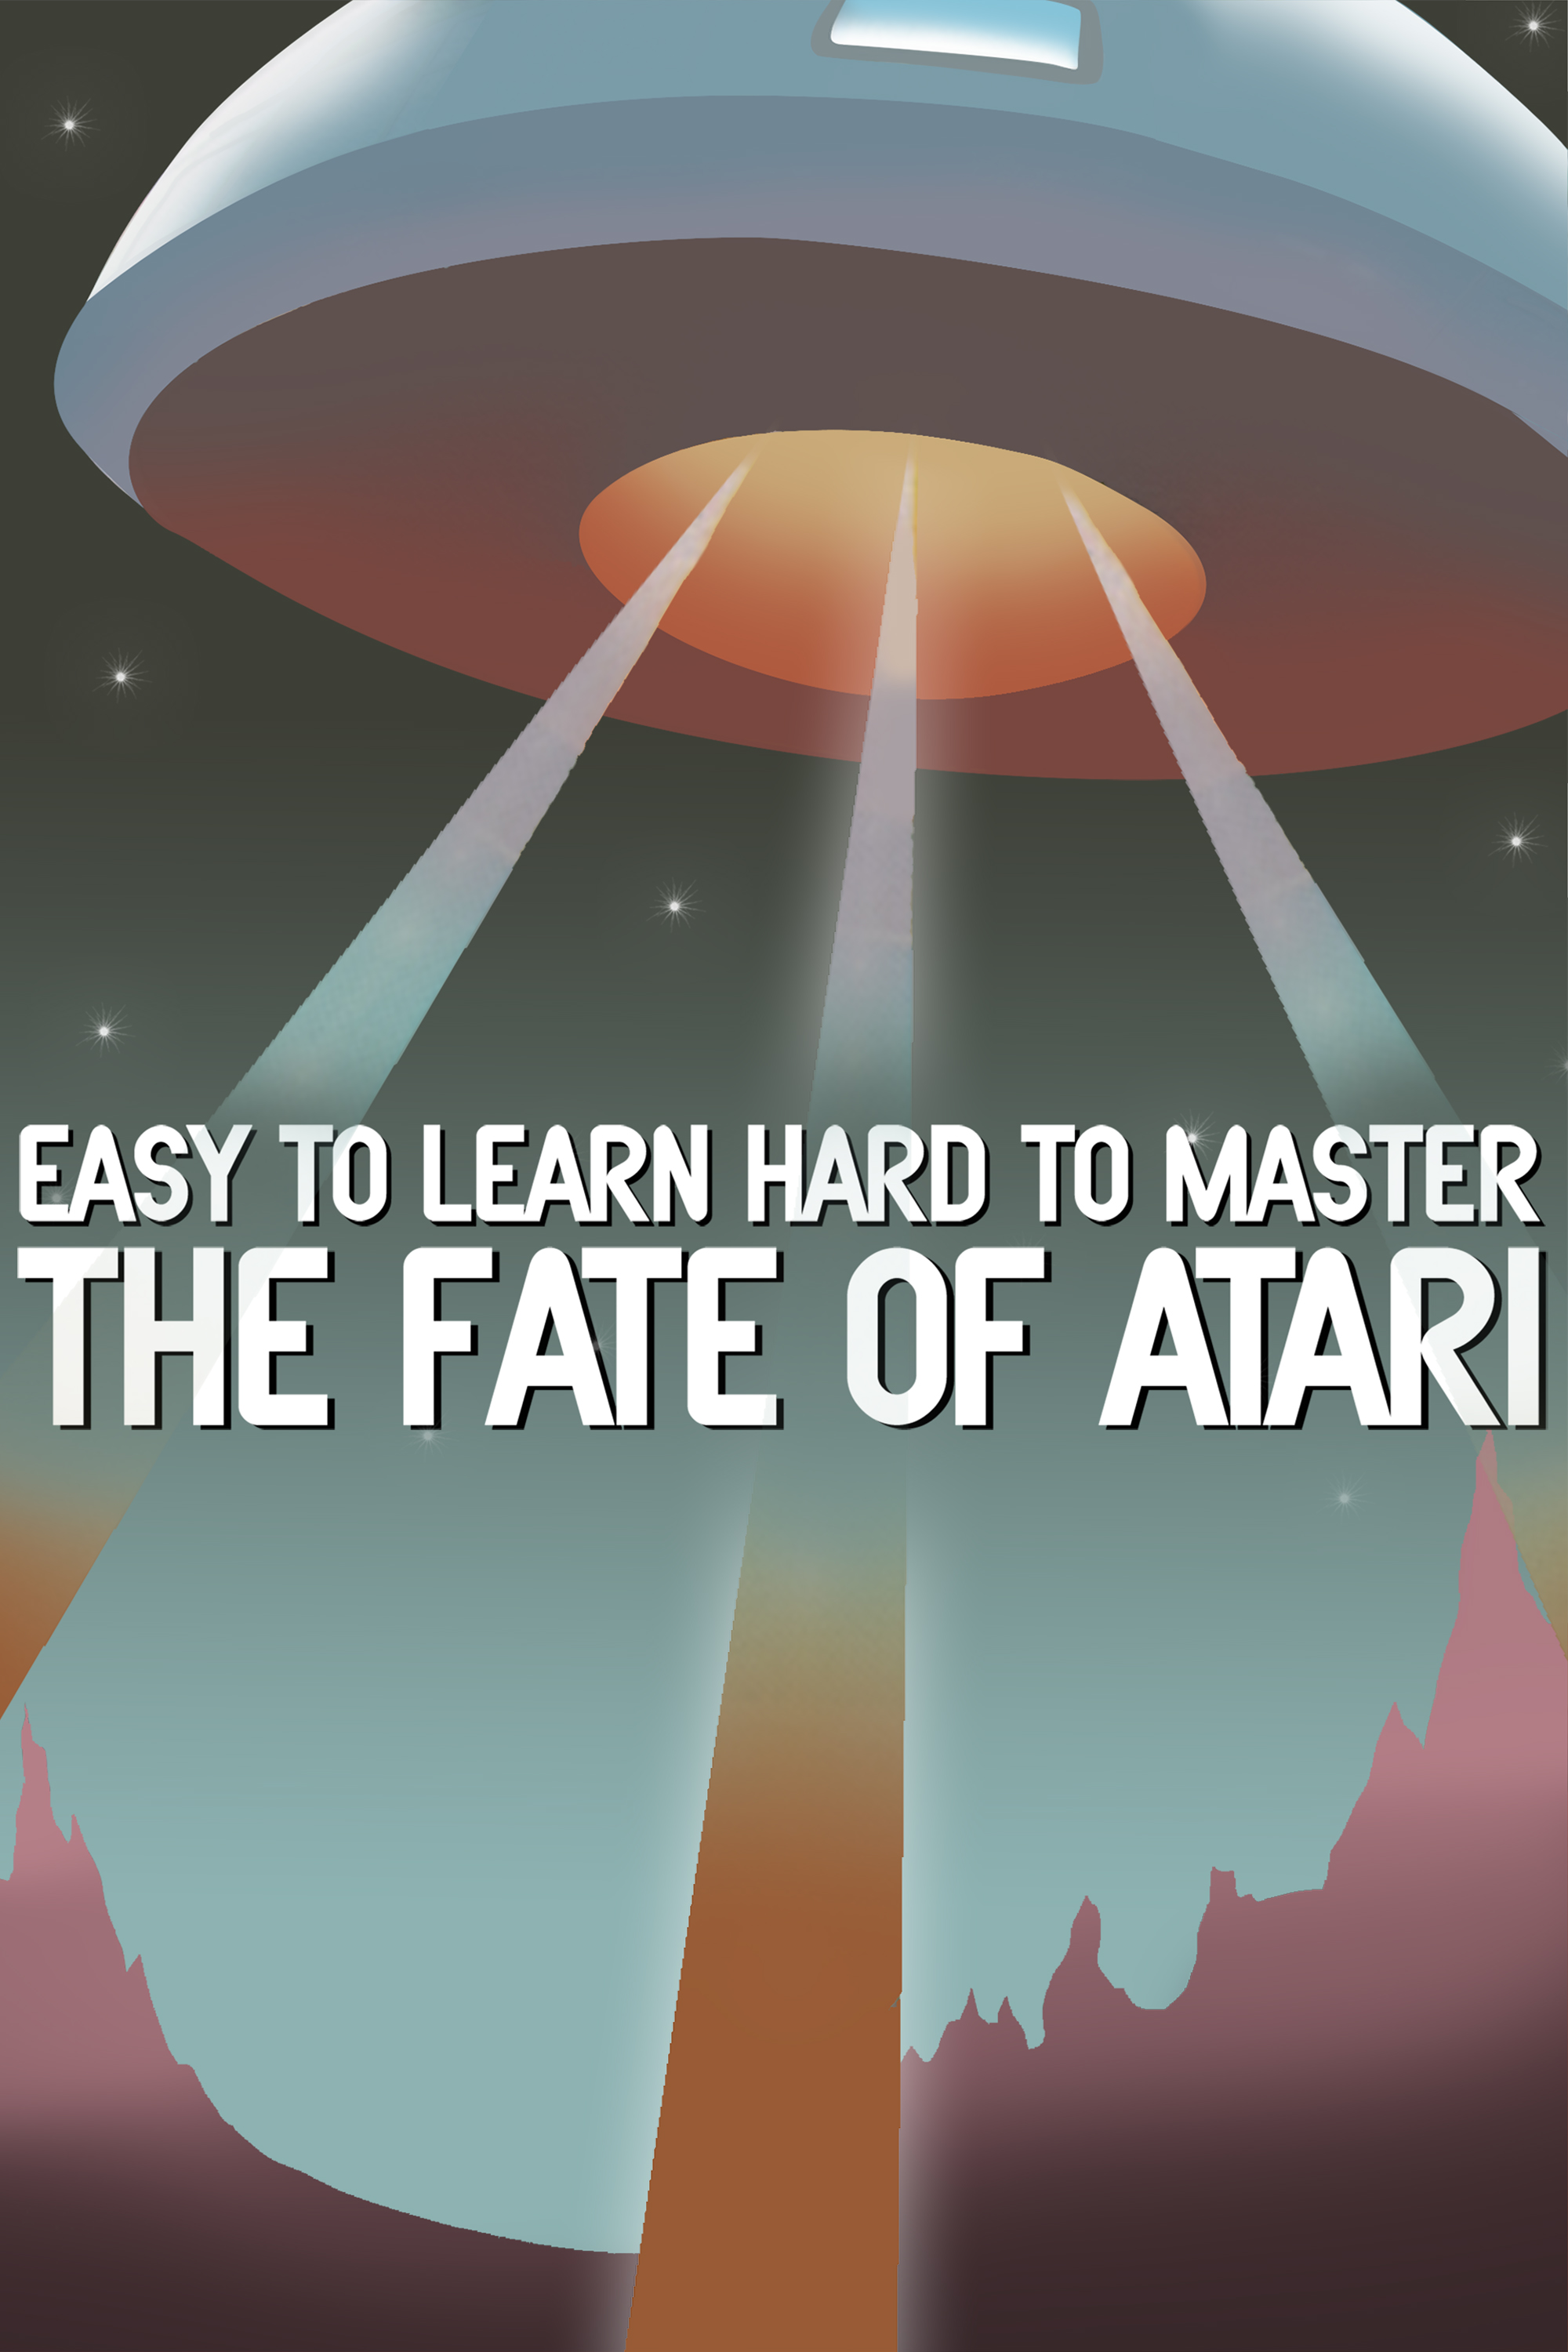 Easy to Learn, Hard to Master: The Fate of Atari (2017) starring Bil Herd on DVD on DVD